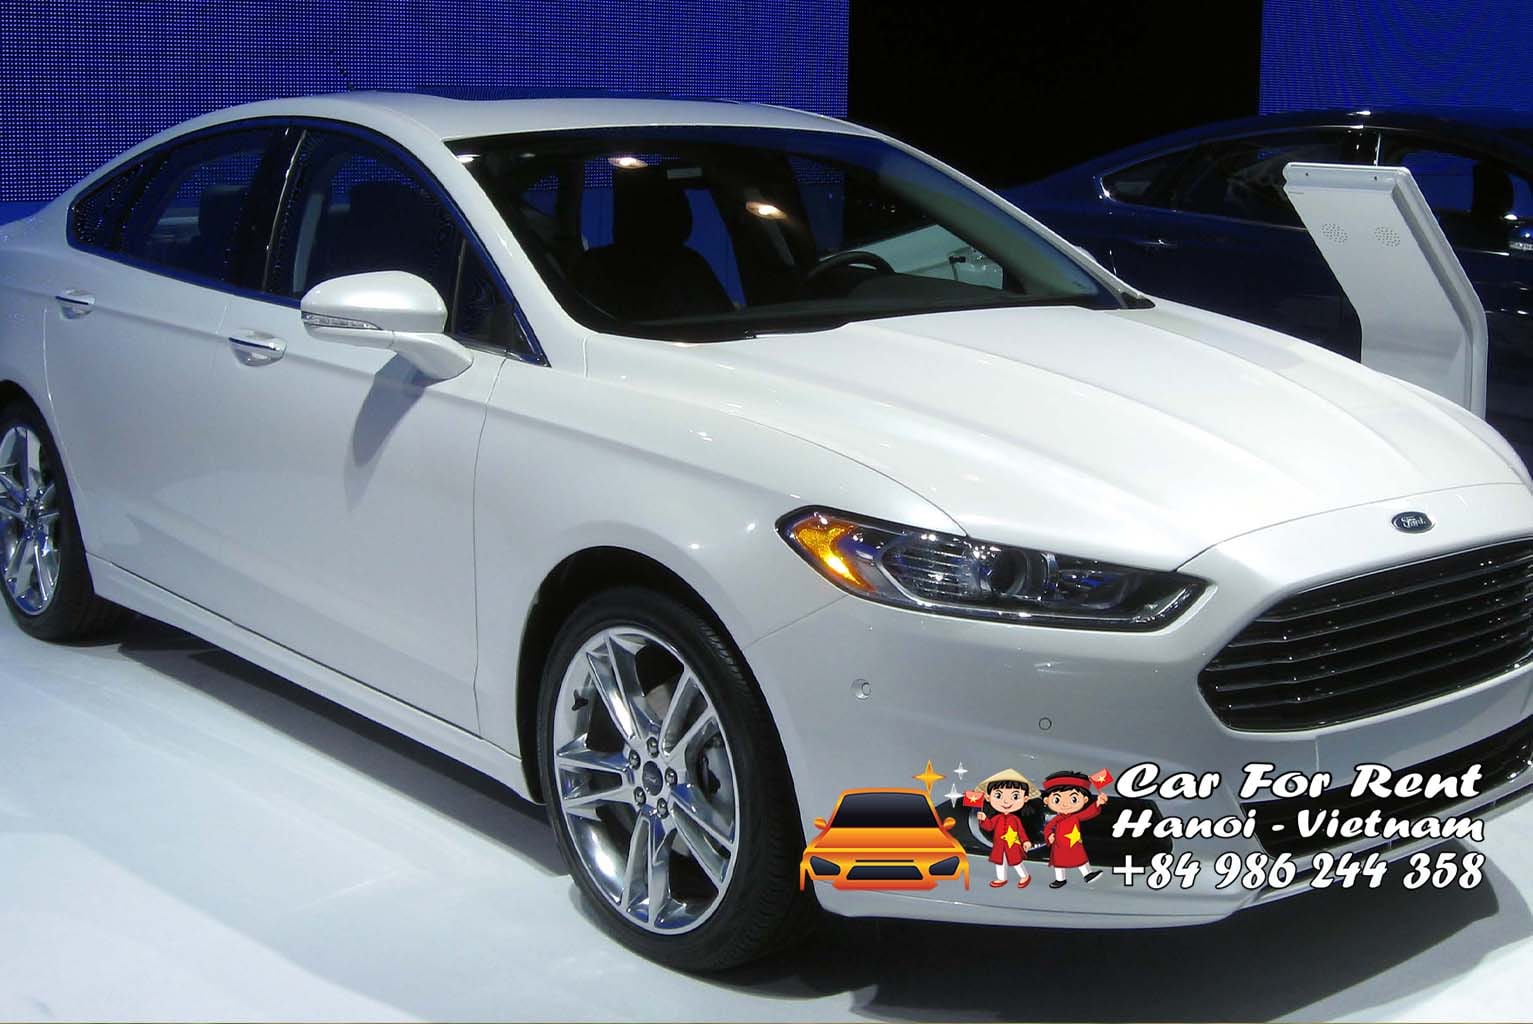 Ford Fusion car rental in vietnam hanoi A Guide for Travelers